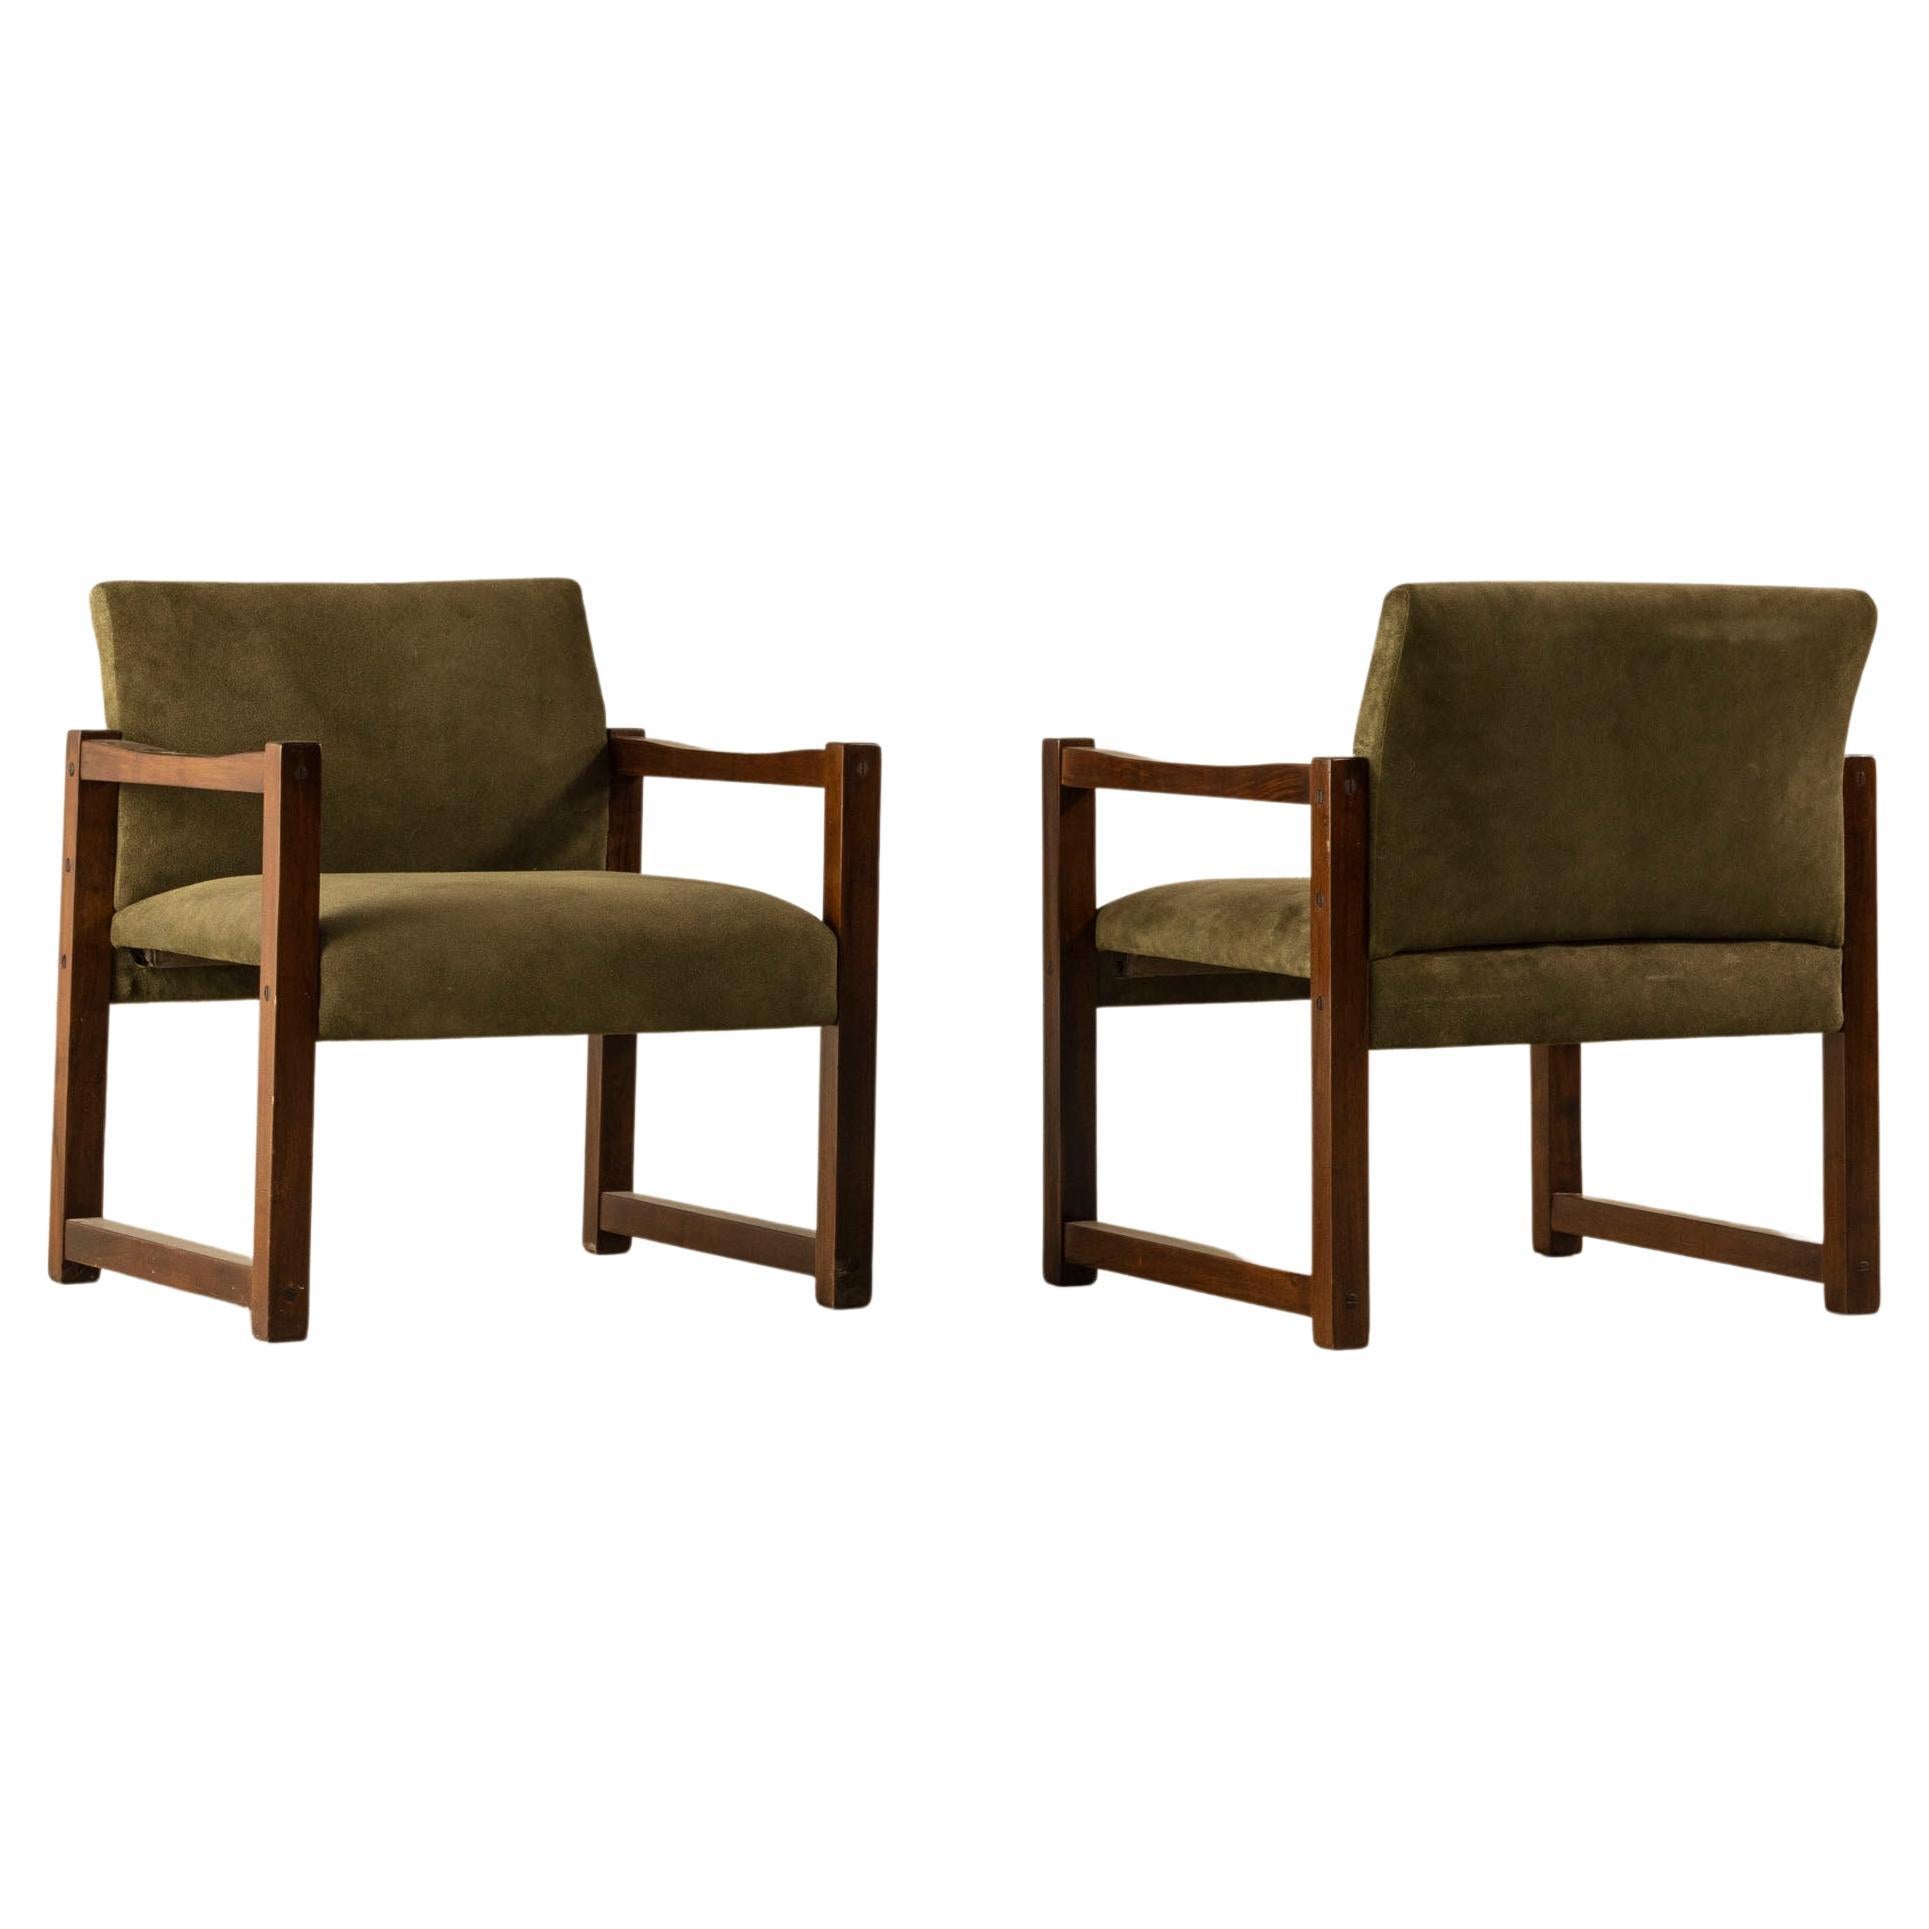 Pair of "Square" 60's Armchairs in wood and fabric, Brazilian Mid-Century Design